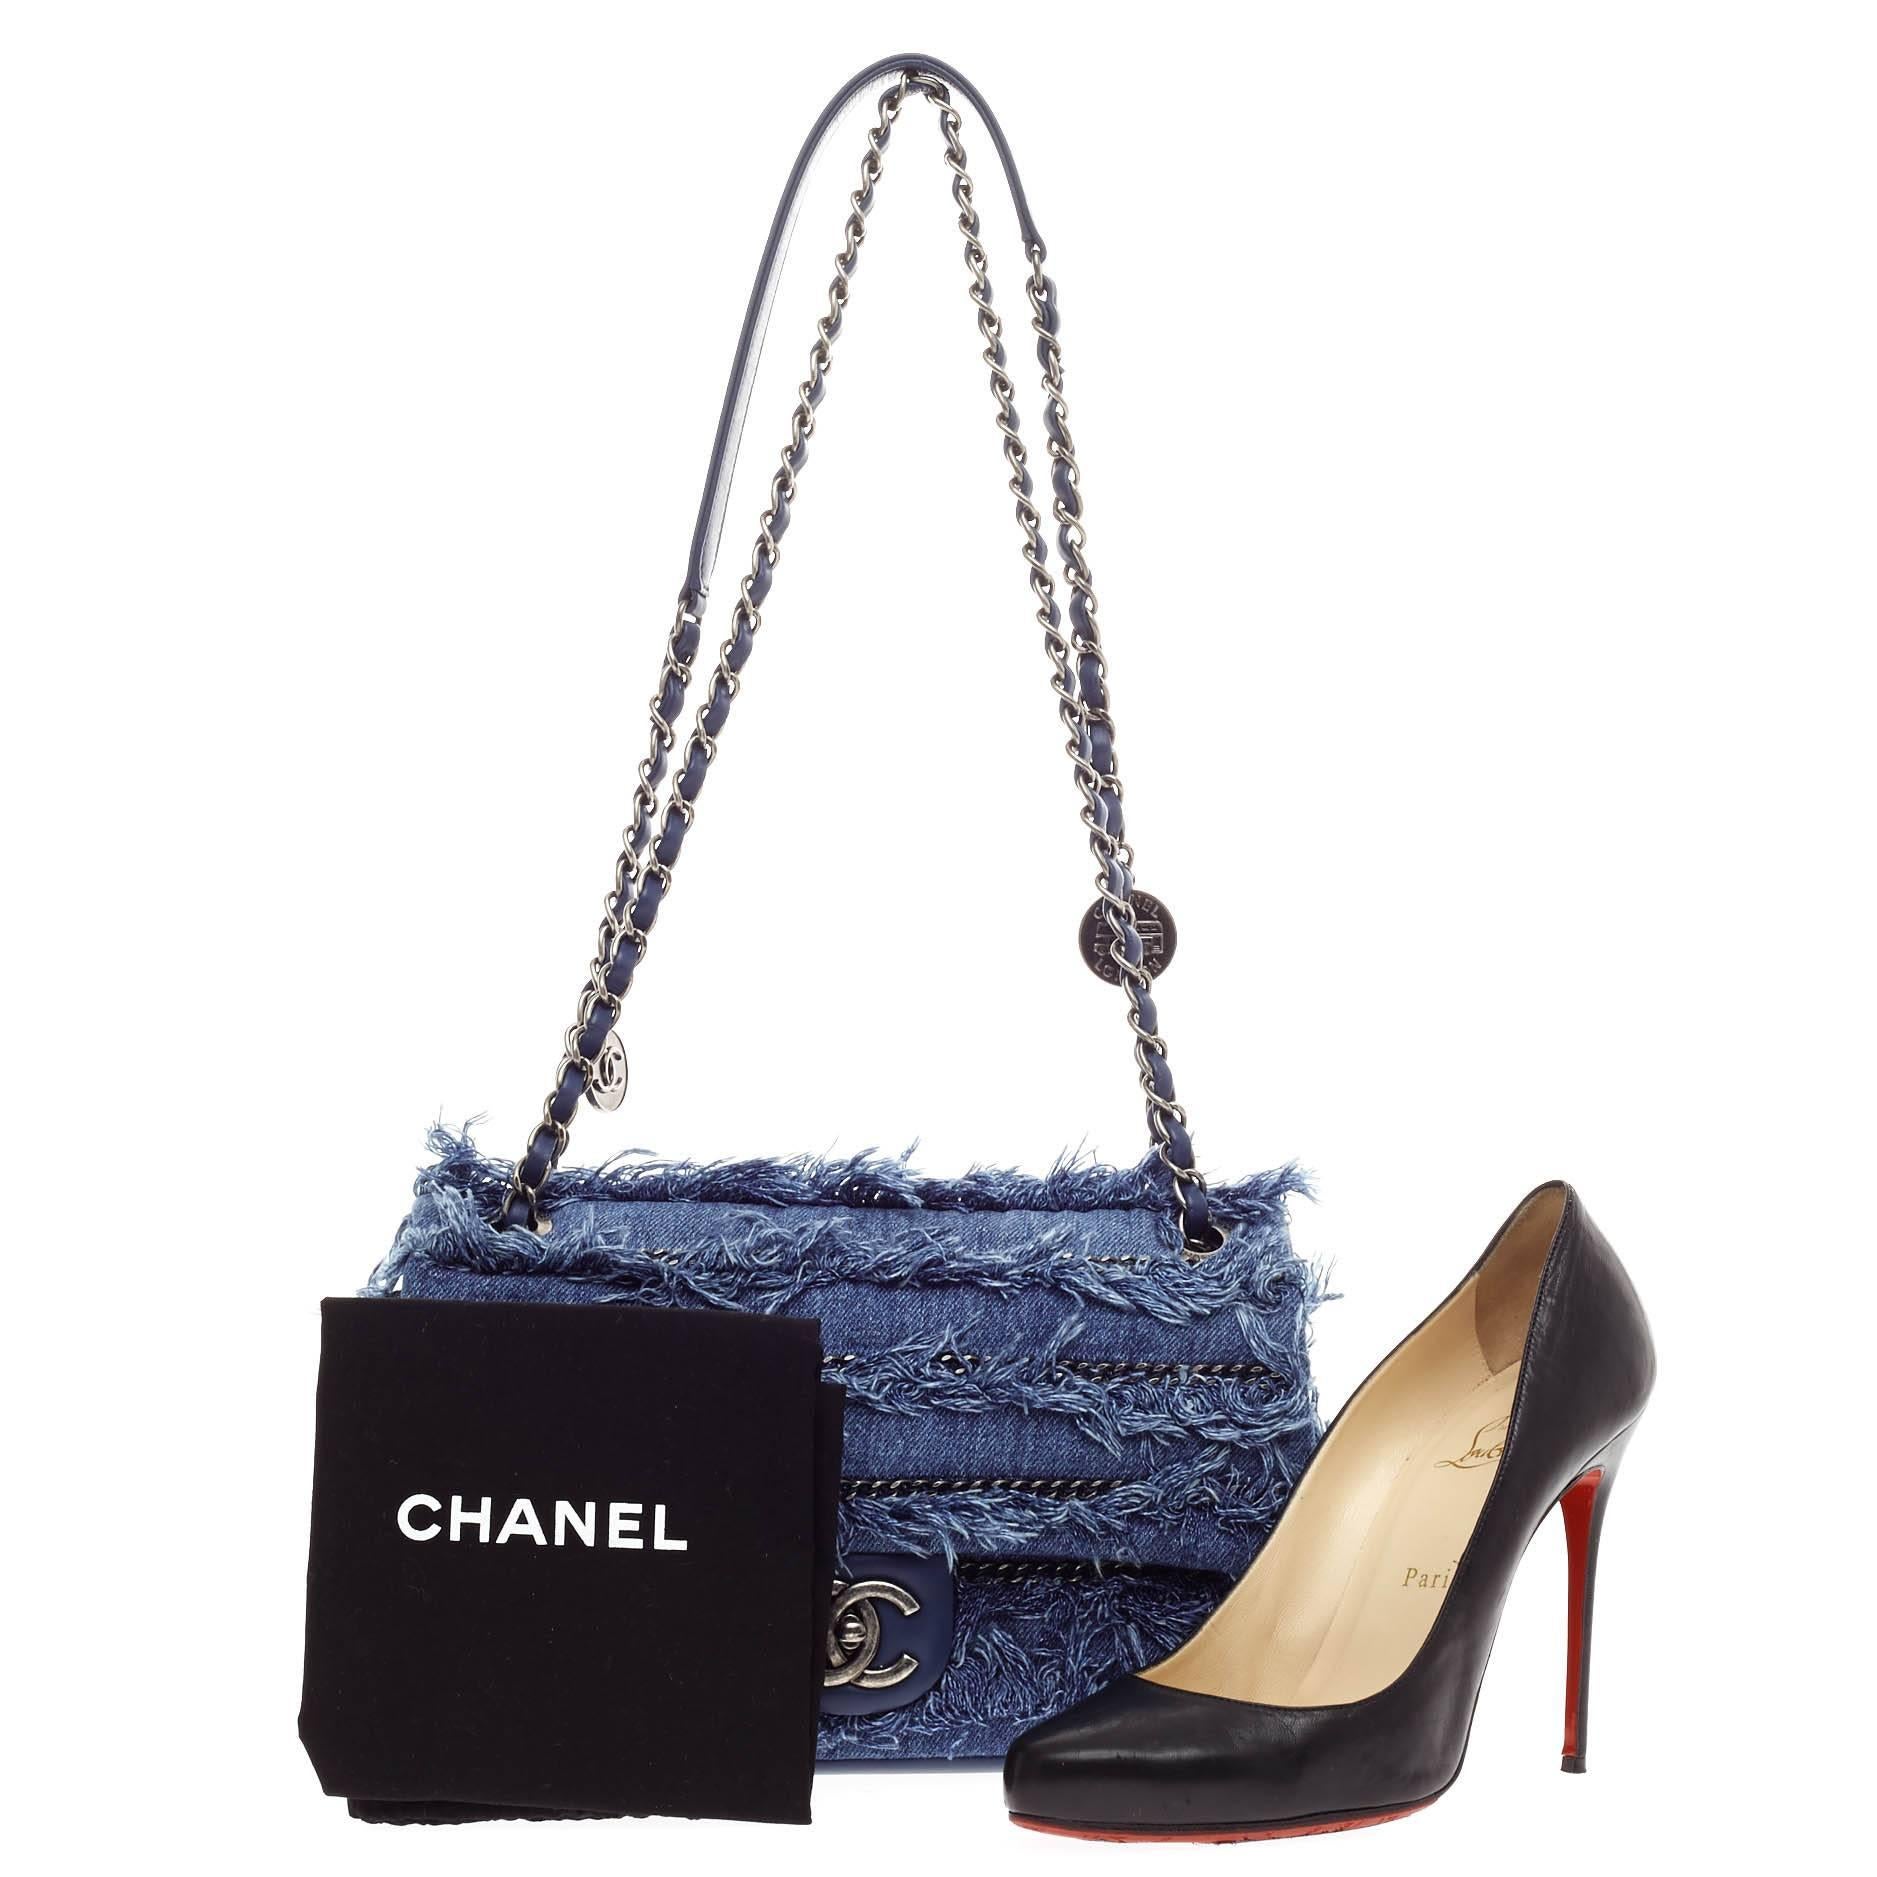 This authentic Chanel Medallion Charm Flap Fringe Denim Medium from the brand's Cruise 2015 collection held in Dubai updated its classic design with meticulous design in a retro-inspired theme. Crafted in washed layered denim with intricate fringe